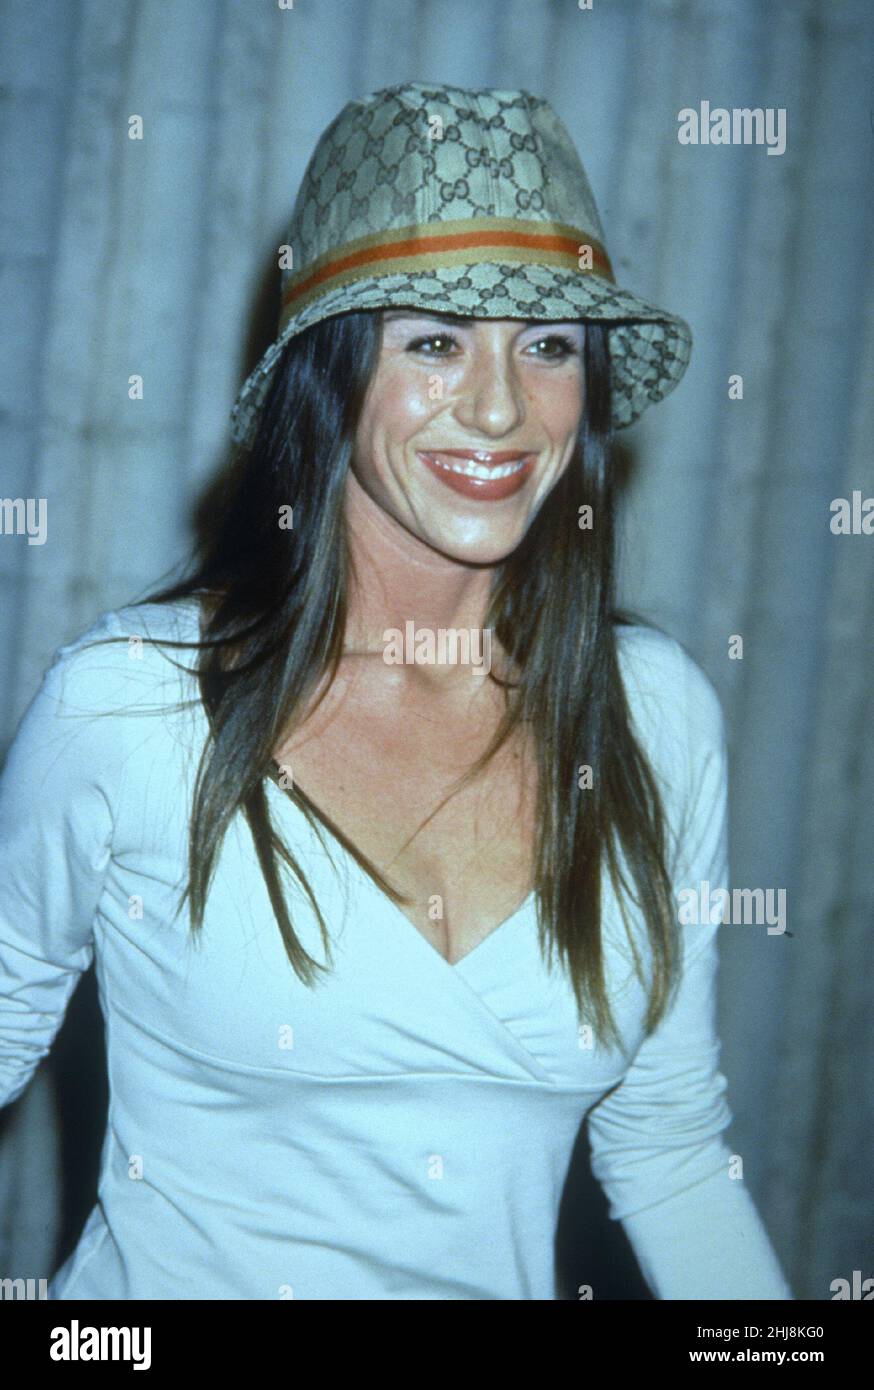 Soleil Moon Frye arrives for the film premiere of 'Dracula 2000' on December 21, 2000 in Los Angeles, CA. Credit: Ron Wolfson / Rock Negatives / MediaPunch Stock Photo